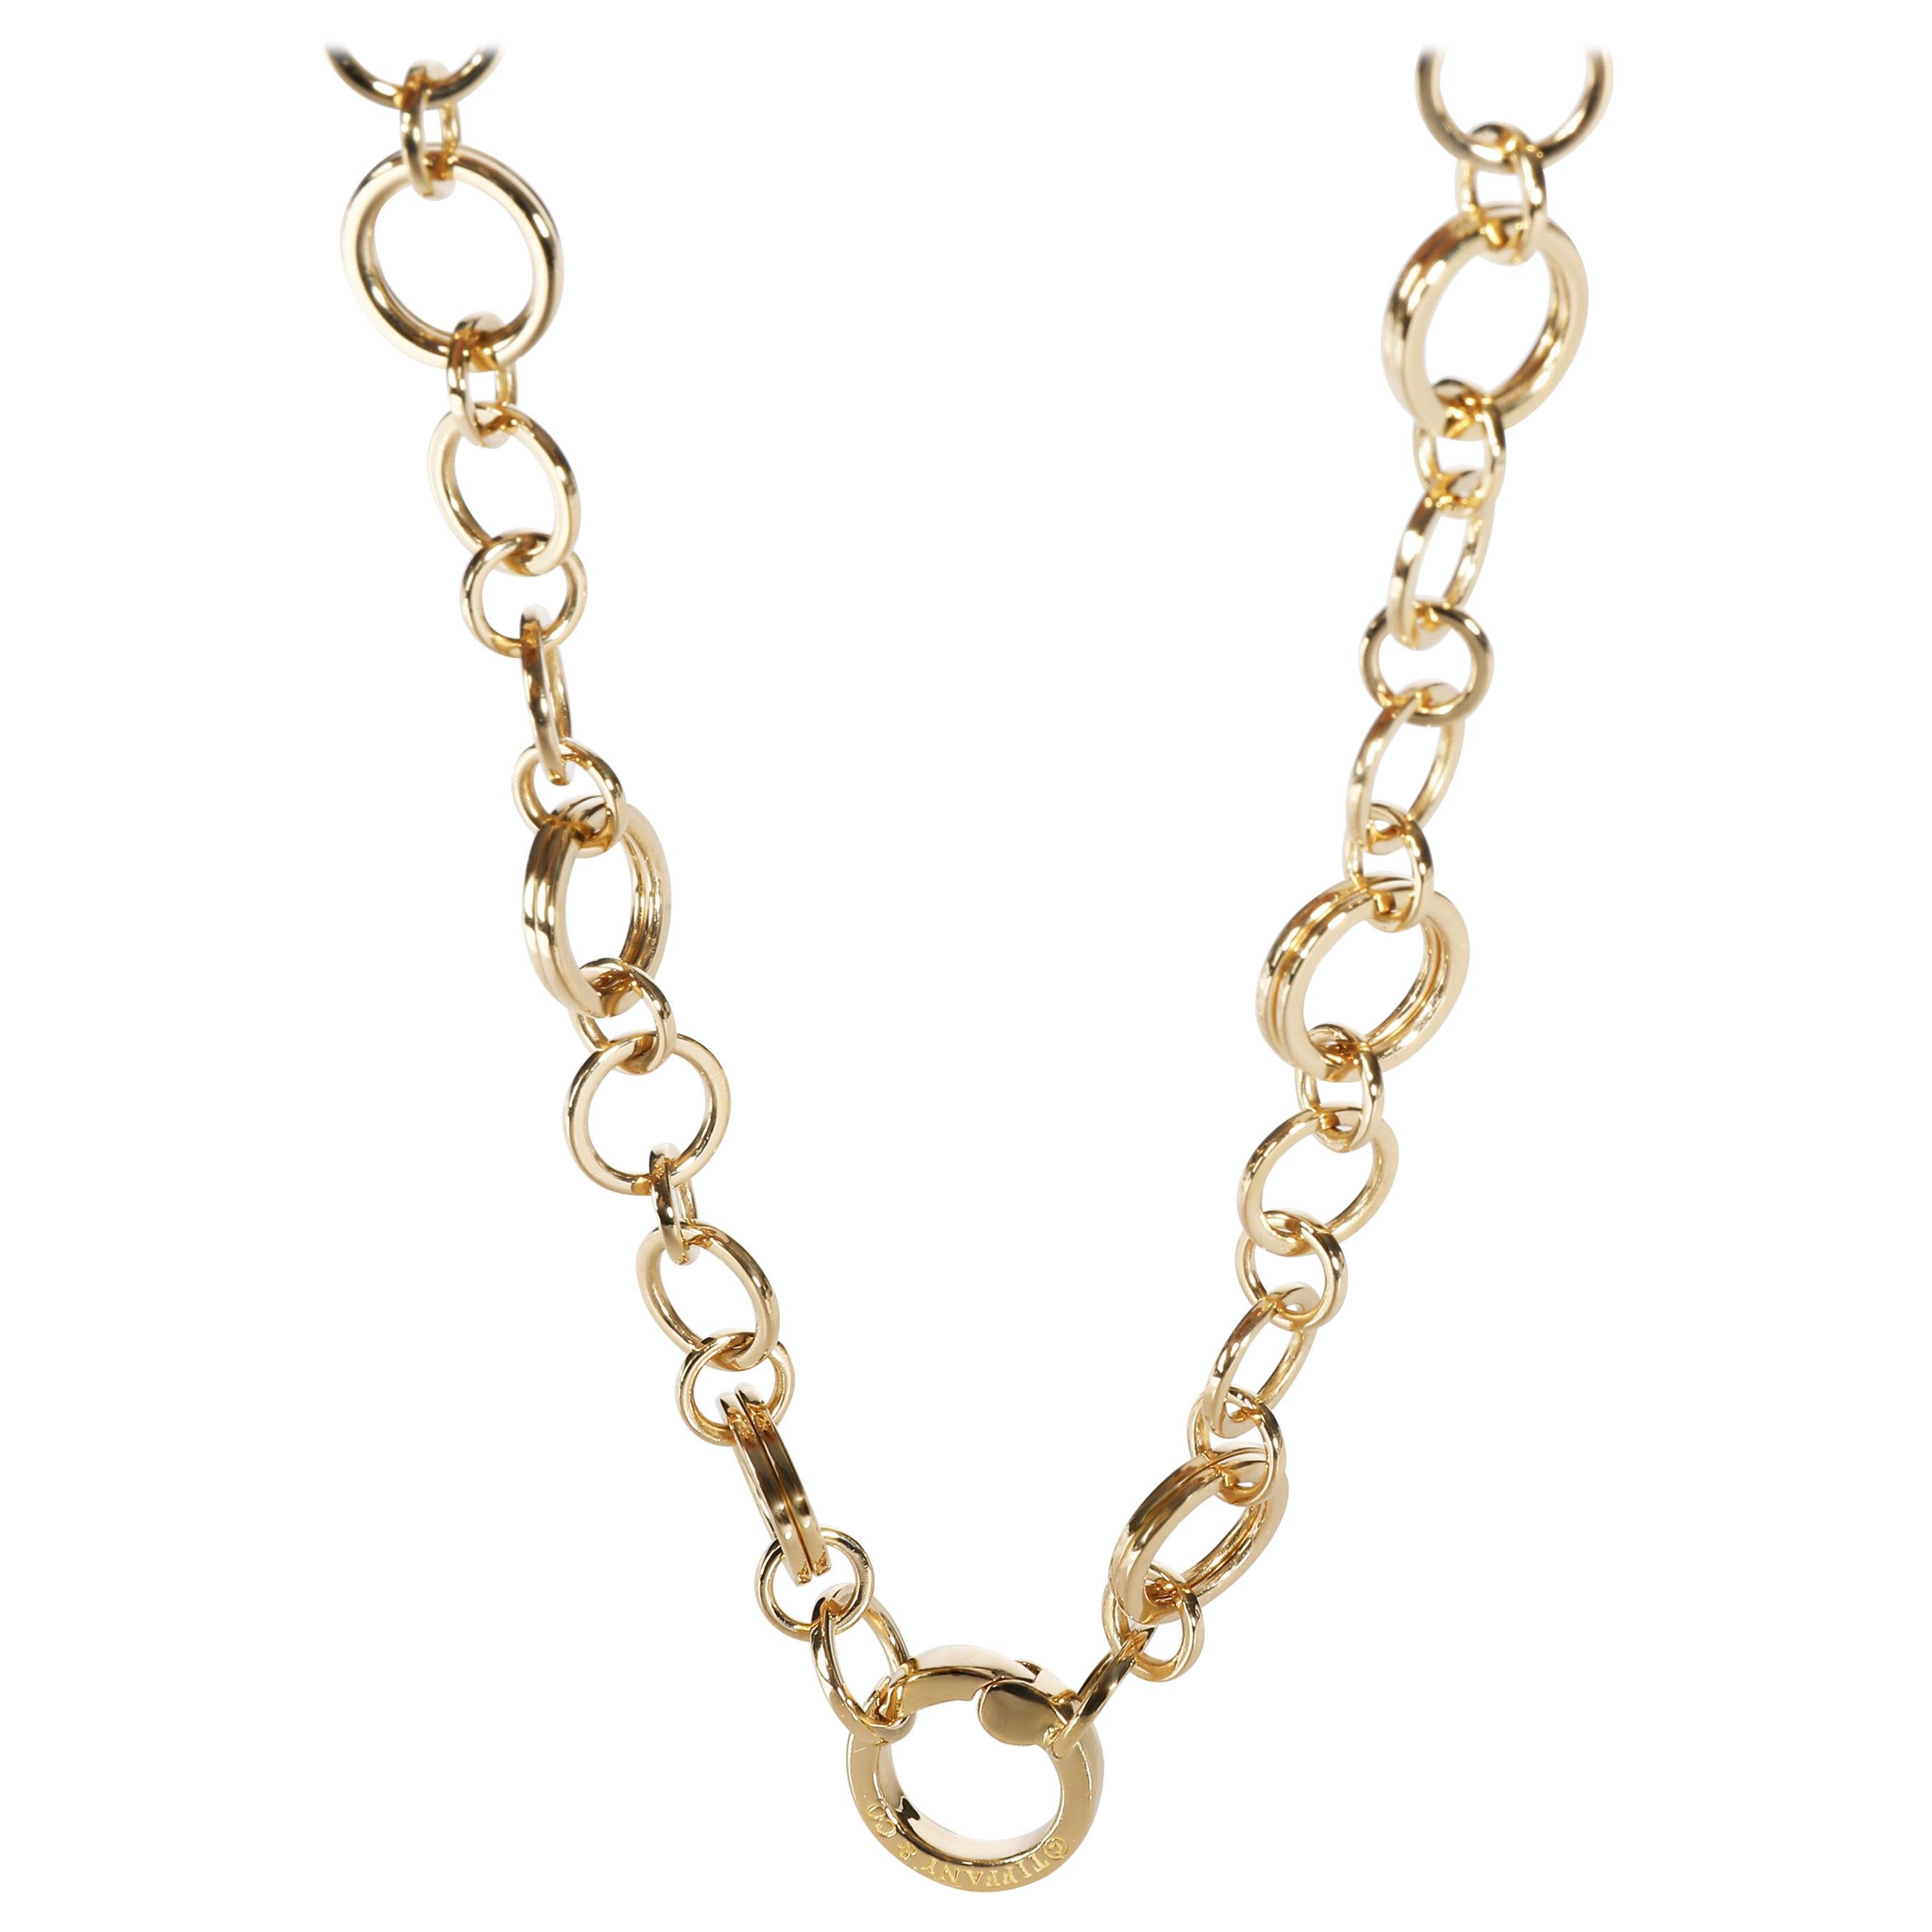 Tiffany & Co. Circle Link Chain Necklace in 18 Karat Yellow Gold